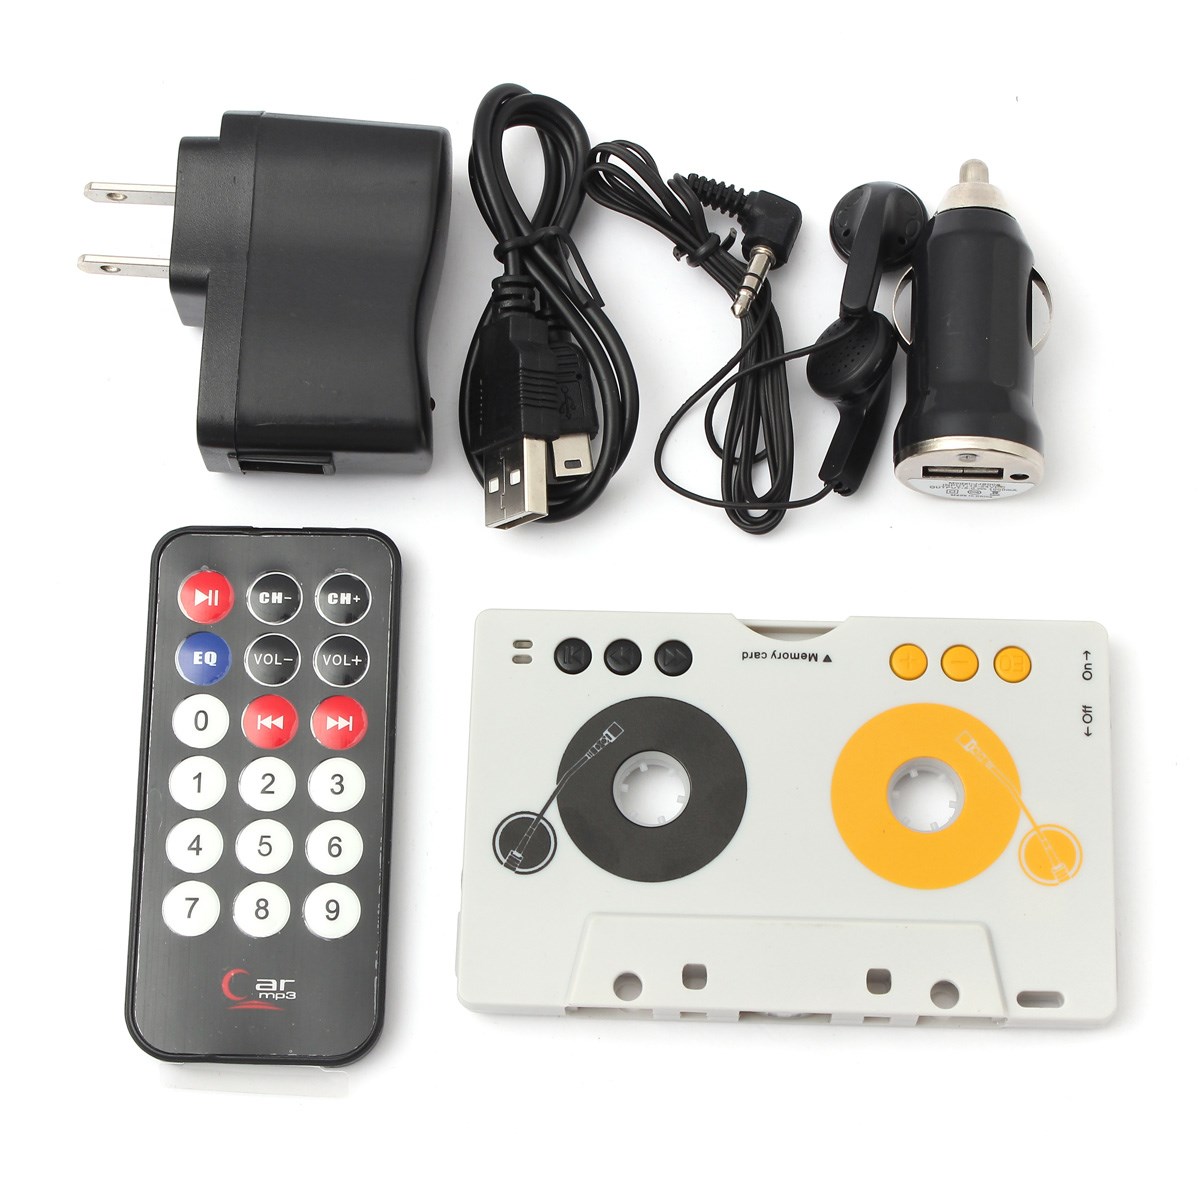 New Vintage Car Tape Cassette SDMMC MP3 Player Adapter Kit With Remote Control For Phone For